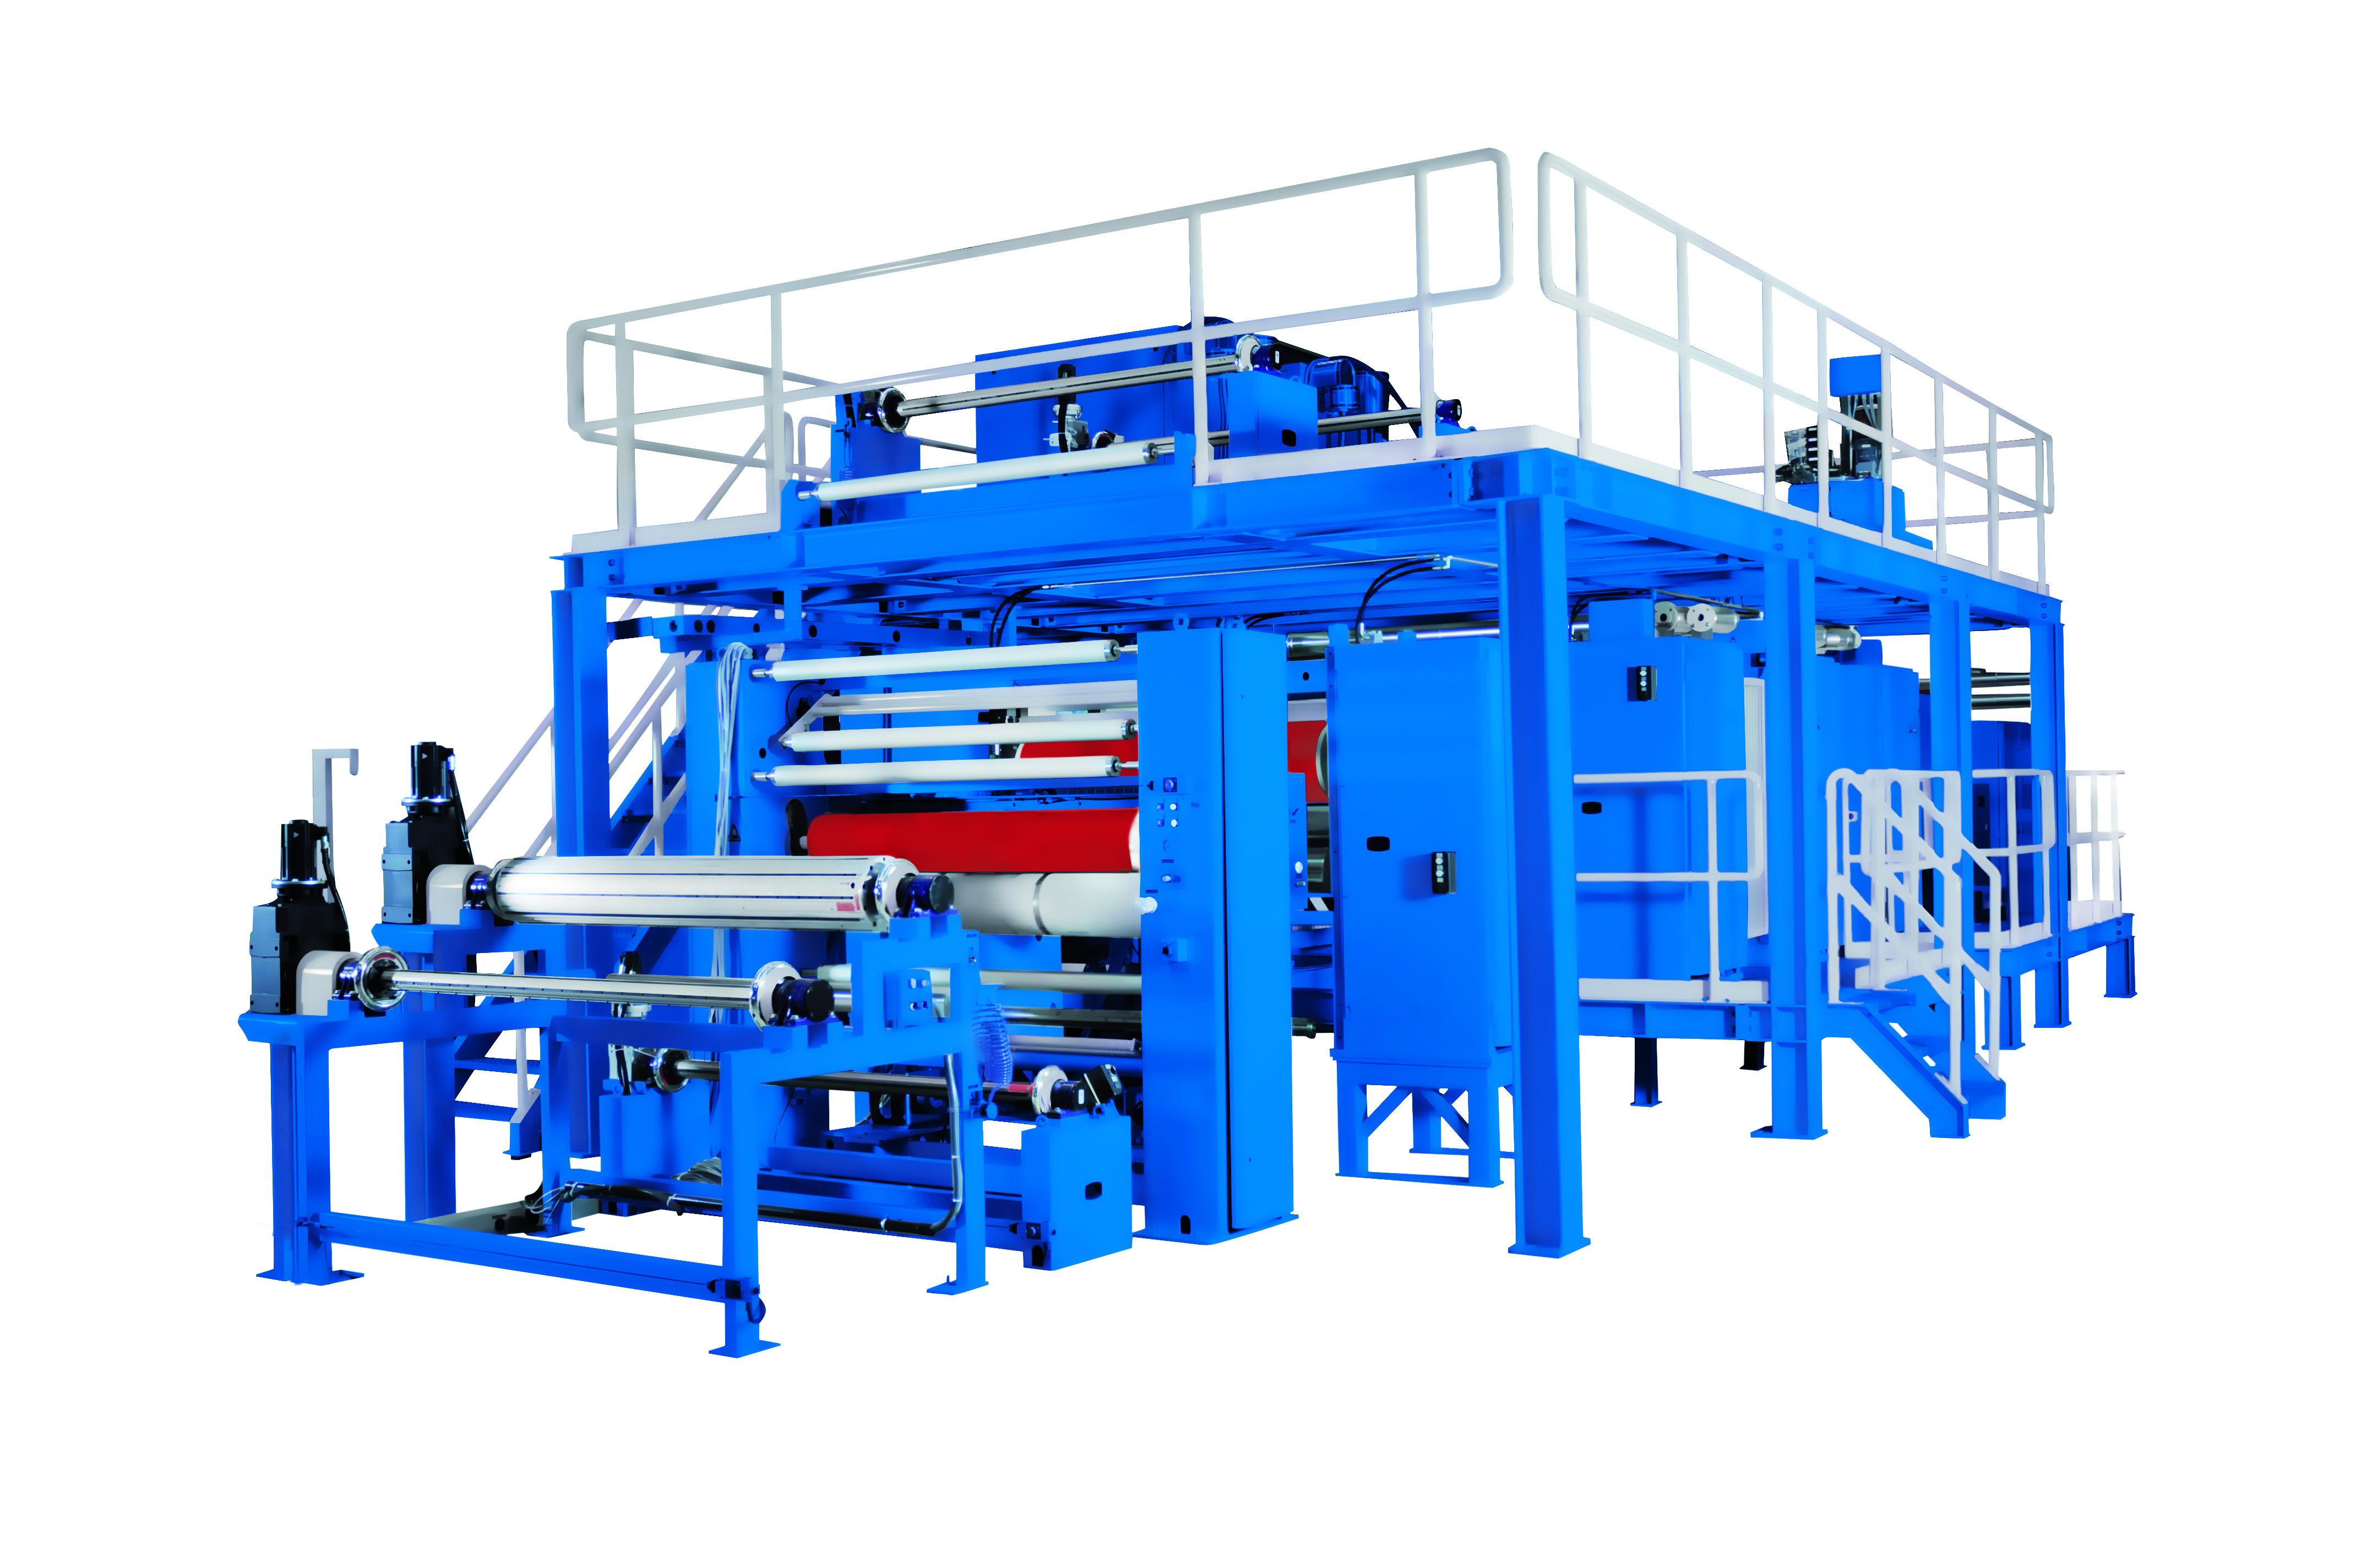 The Cavipreg pre-preg machine from Santex is widely used in the manufacture of advanced structural composites.